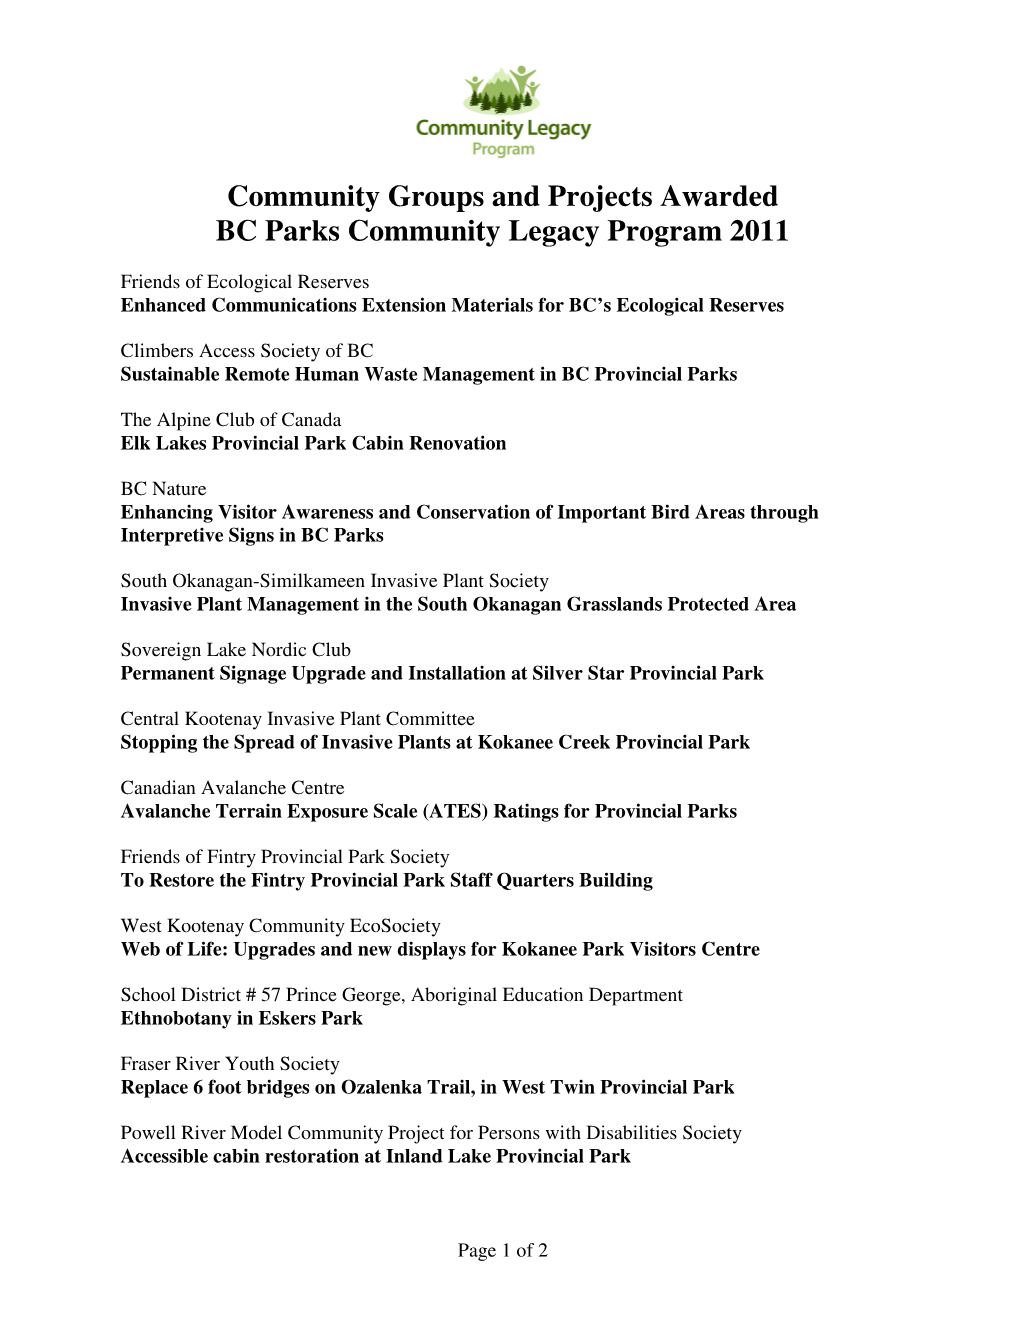 Community Groups and Projects Awarded BC Parks Community Legacy Program 2011